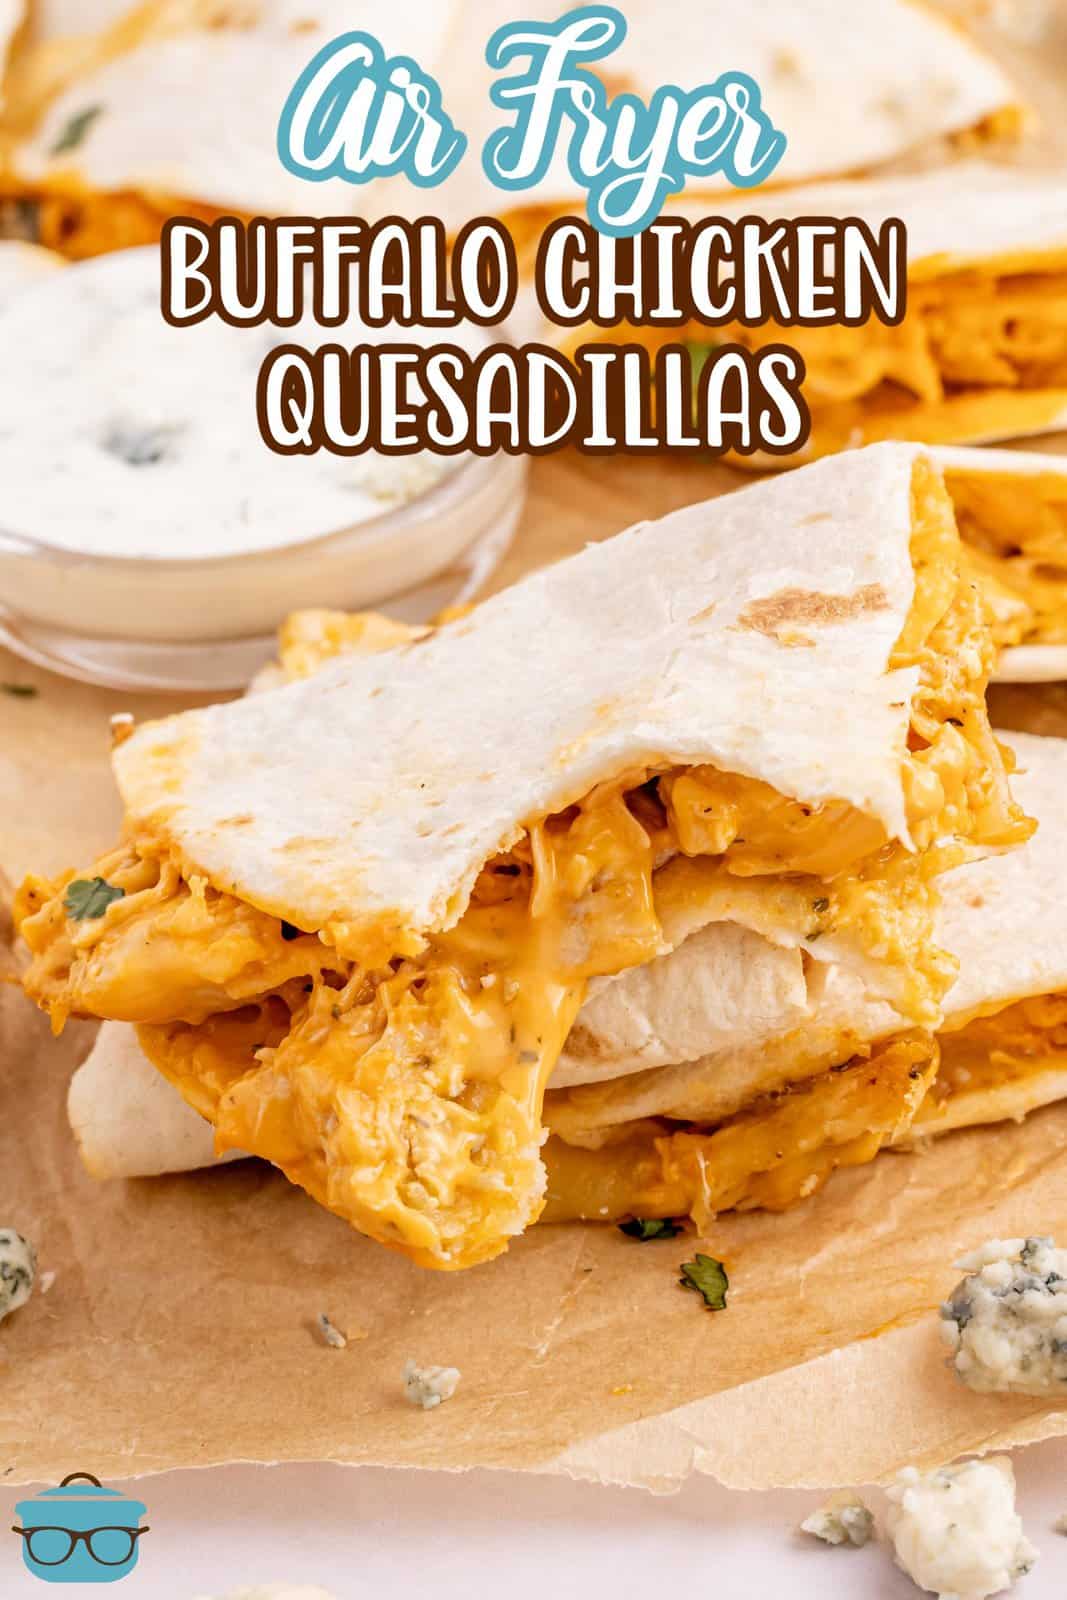 A few Buffalo Chicken Quesadillas with a bite taken out of one.